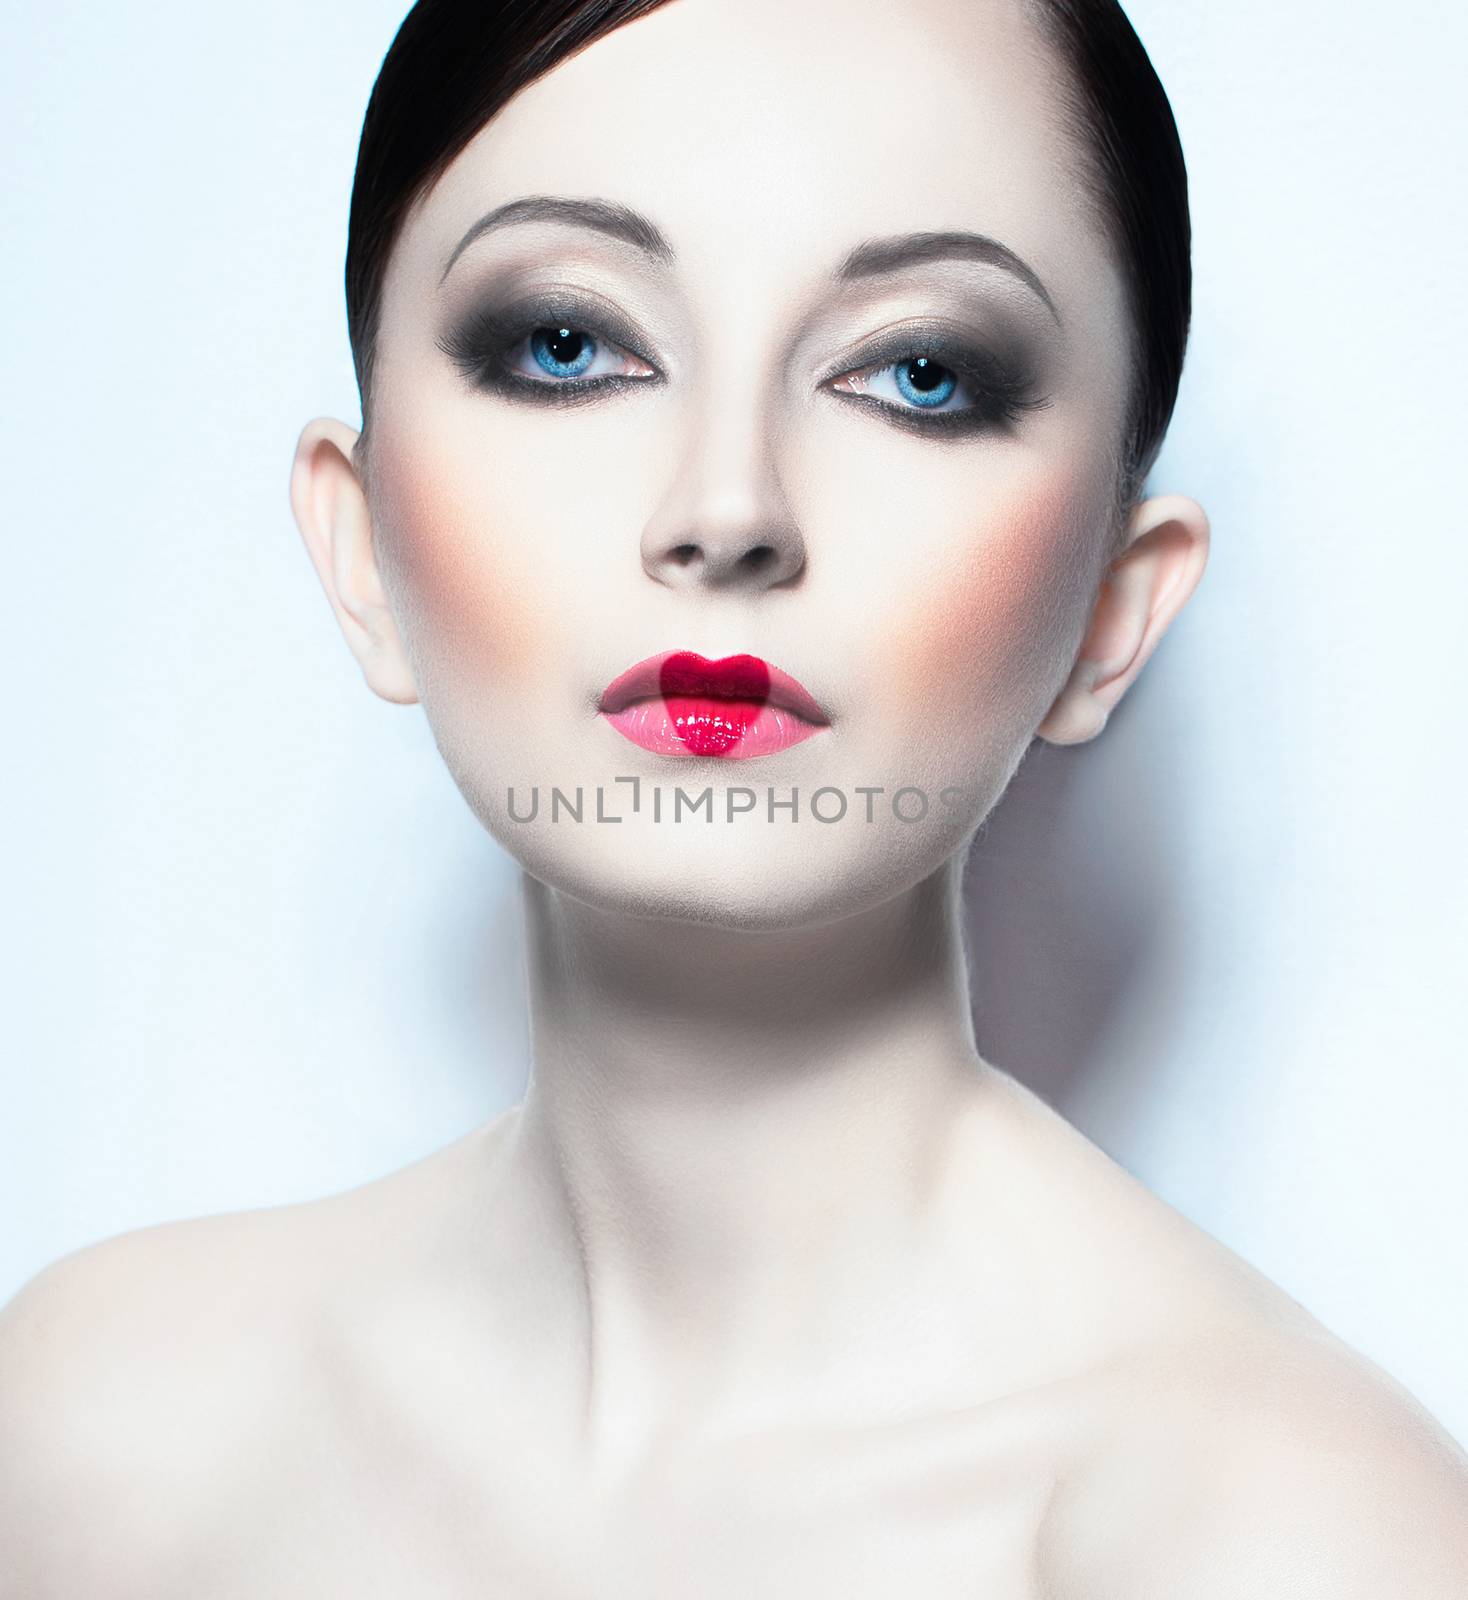 Portrait of a beautiful young woman like doll with a glamorous cool makeup